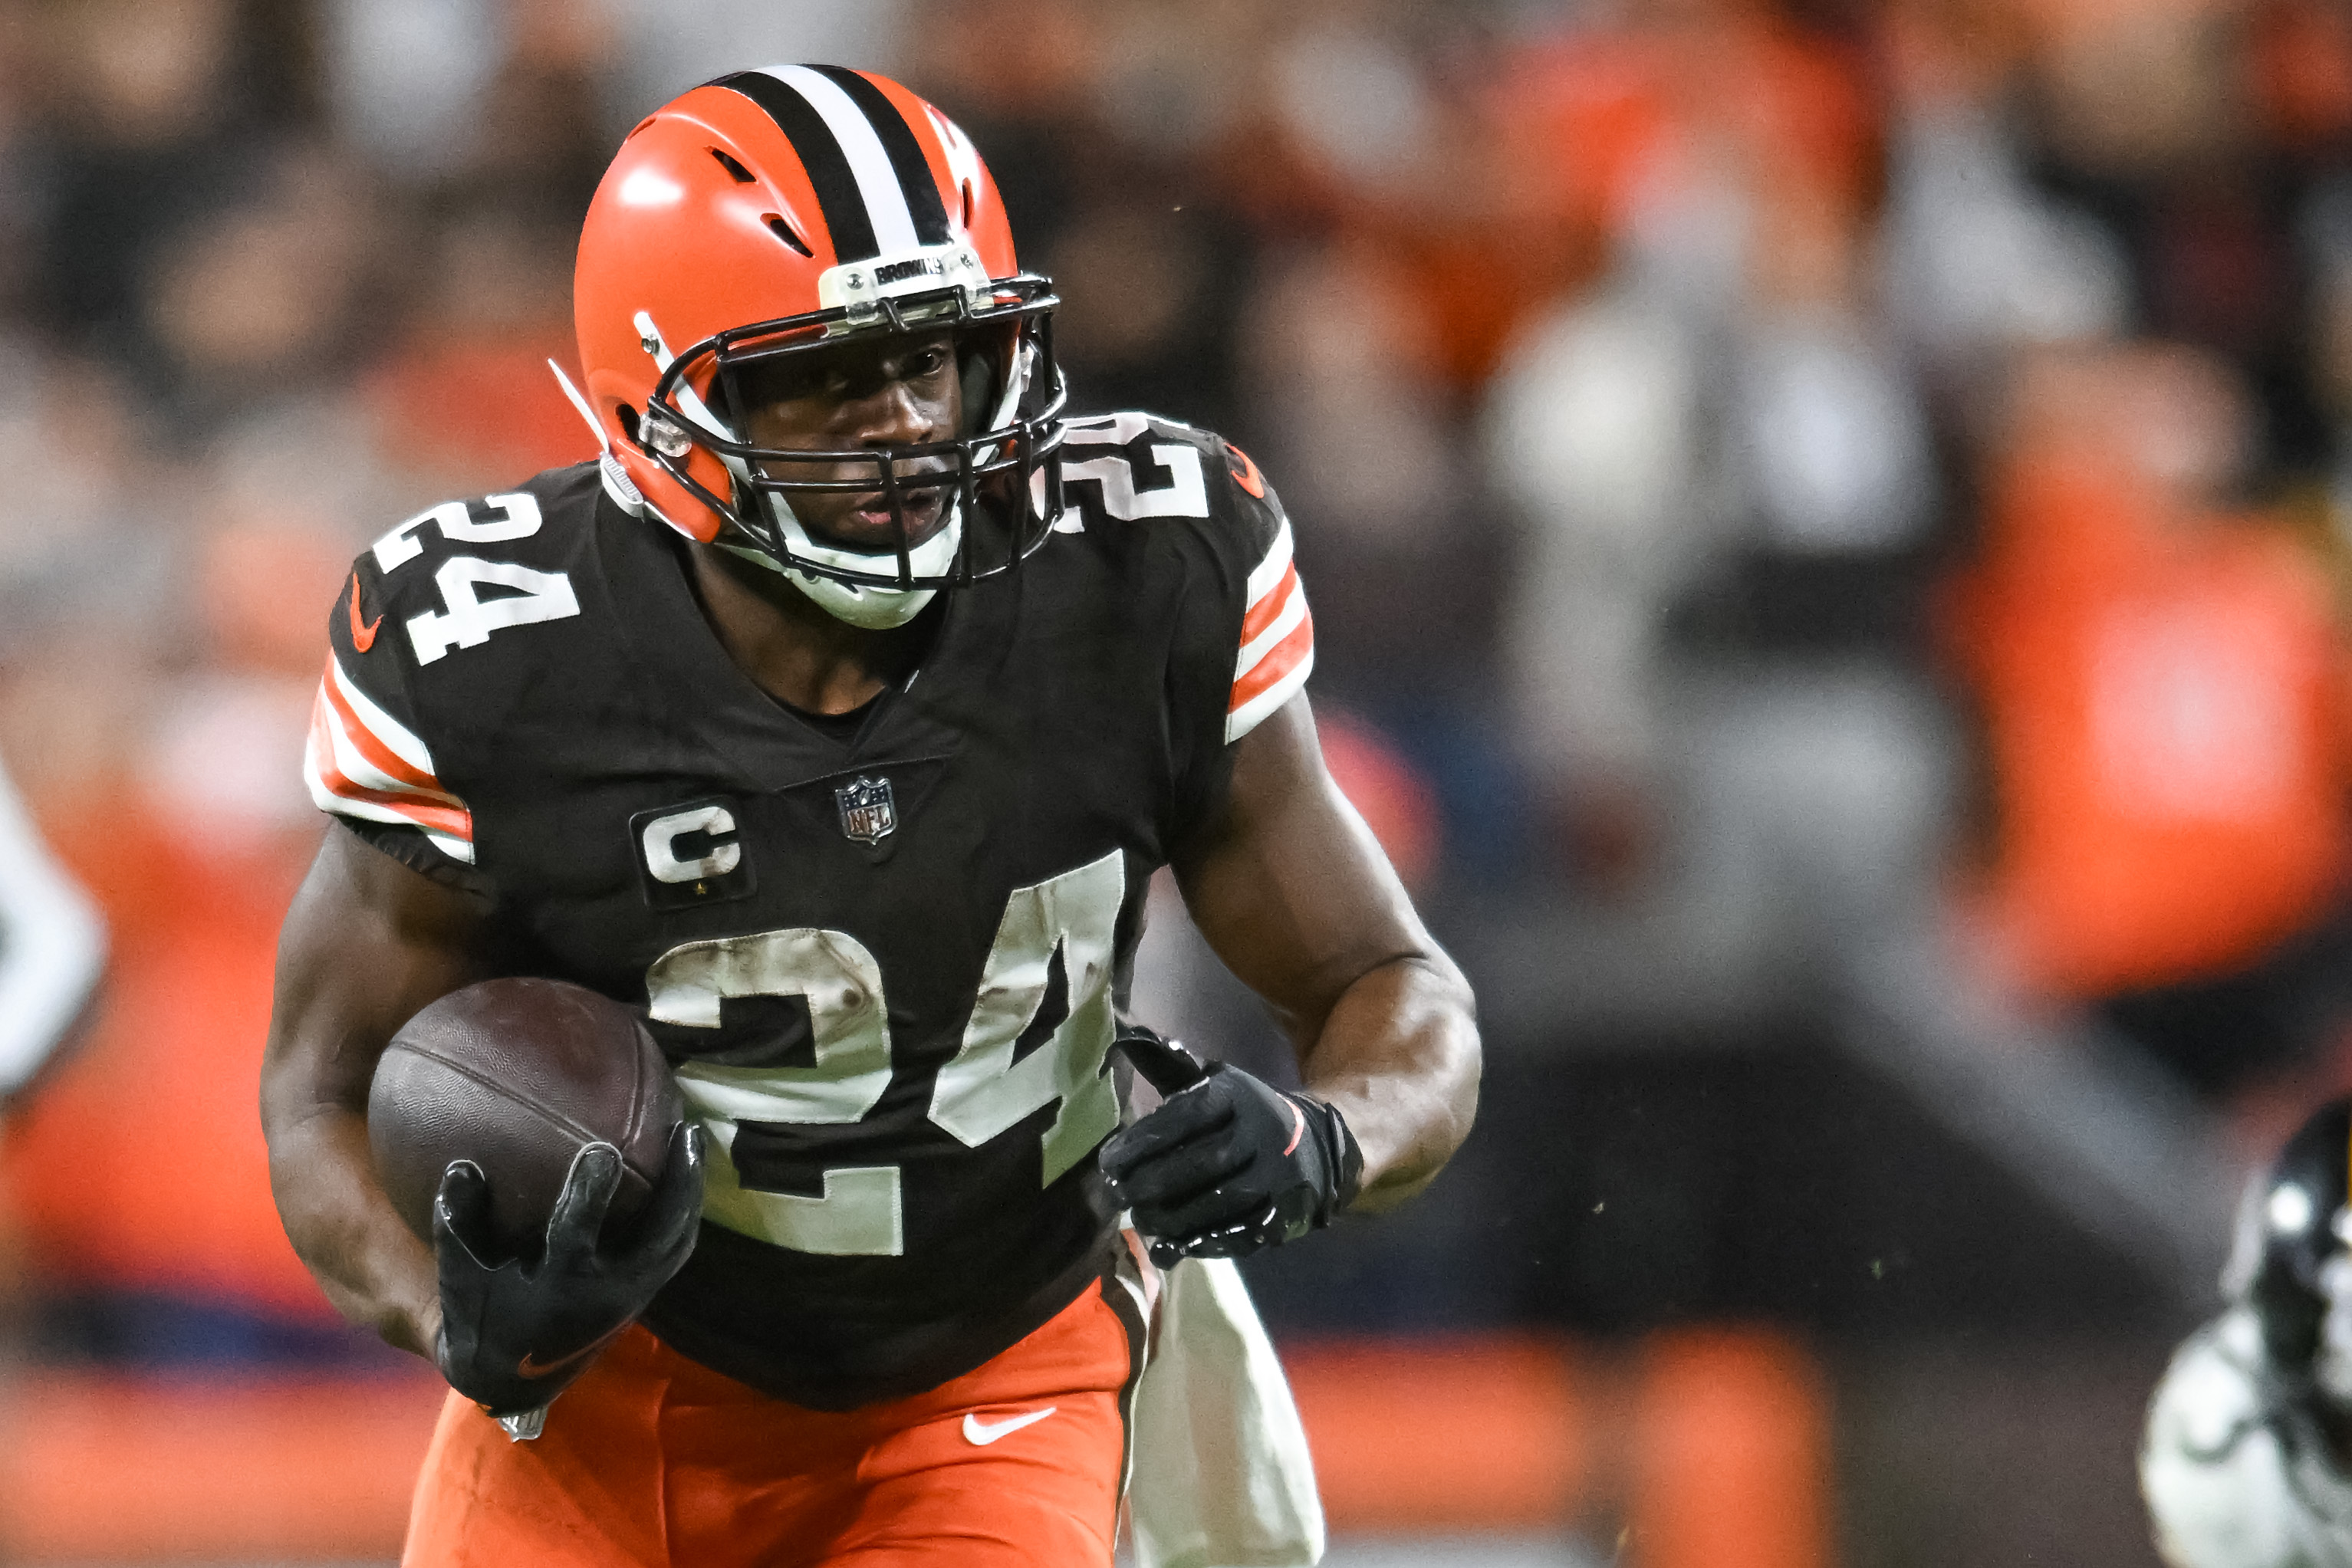 Nick Chubb #24 of the Cleveland Browns rushes during the first quarter against the Pittsburgh Steelers at FirstEnergy Stadium on September 22, 2022 in Cleveland, Ohio.